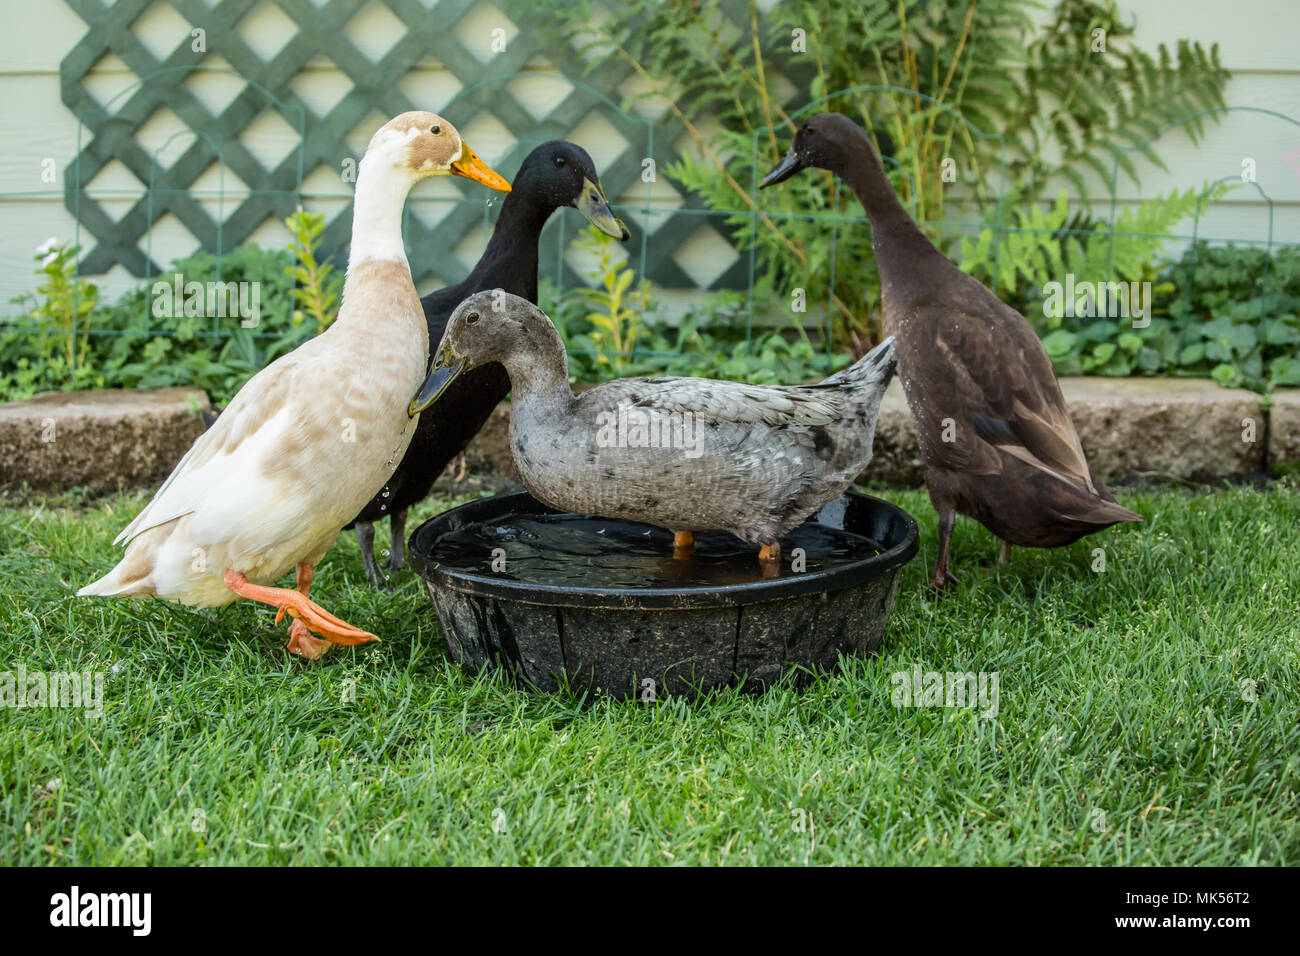 Leavenworth, Washington, USA.  Four types of Indian Runner ducks: White and Fawn, black, chocolate and blue.  (PR) Stock Photo